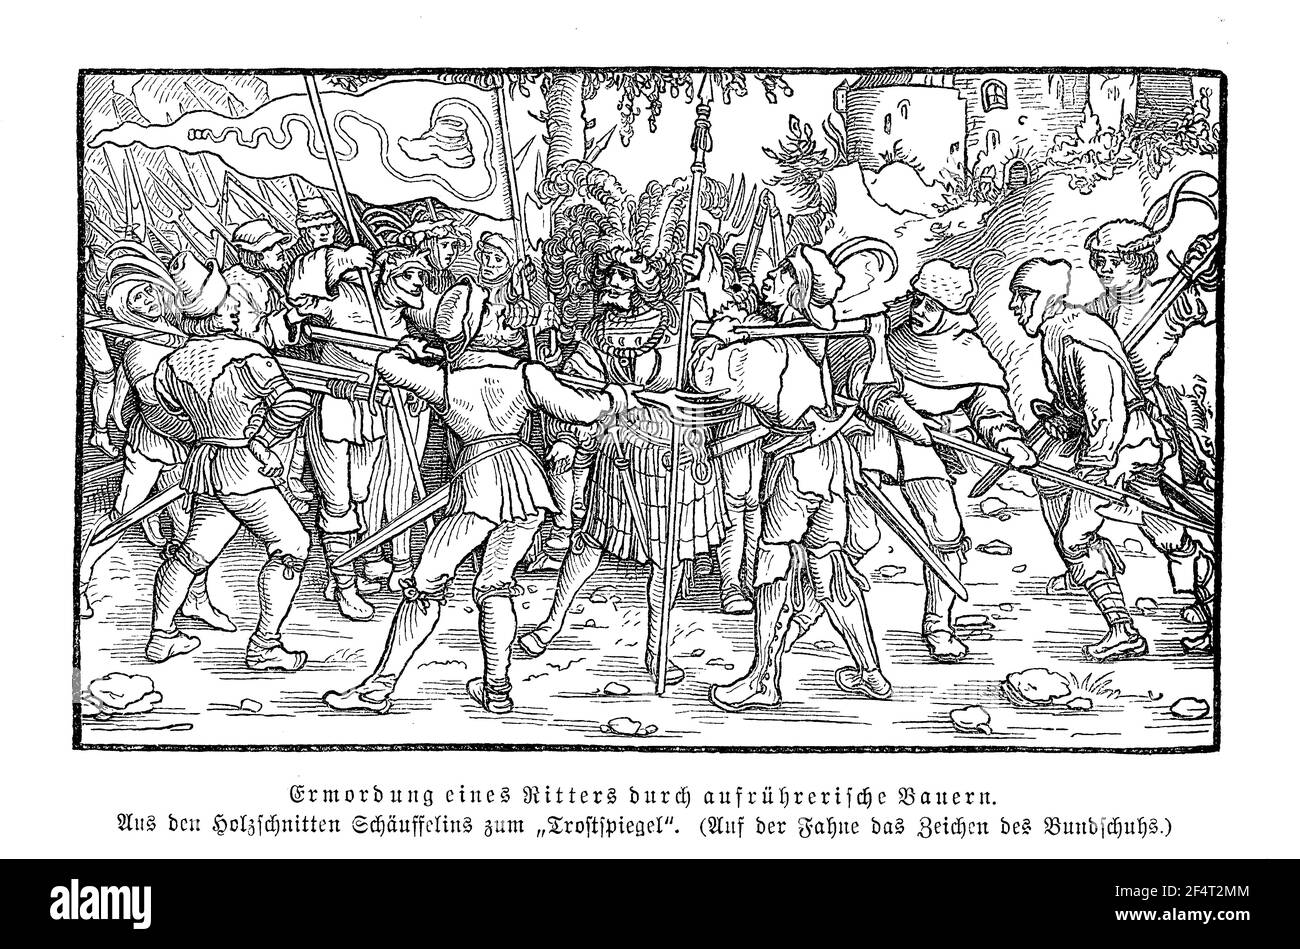 Assassination of a knight by hand of rebellious peasants of the shoemaker league, engraving by Hans Leonhard Schaeufelein, 16th century Stock Photo